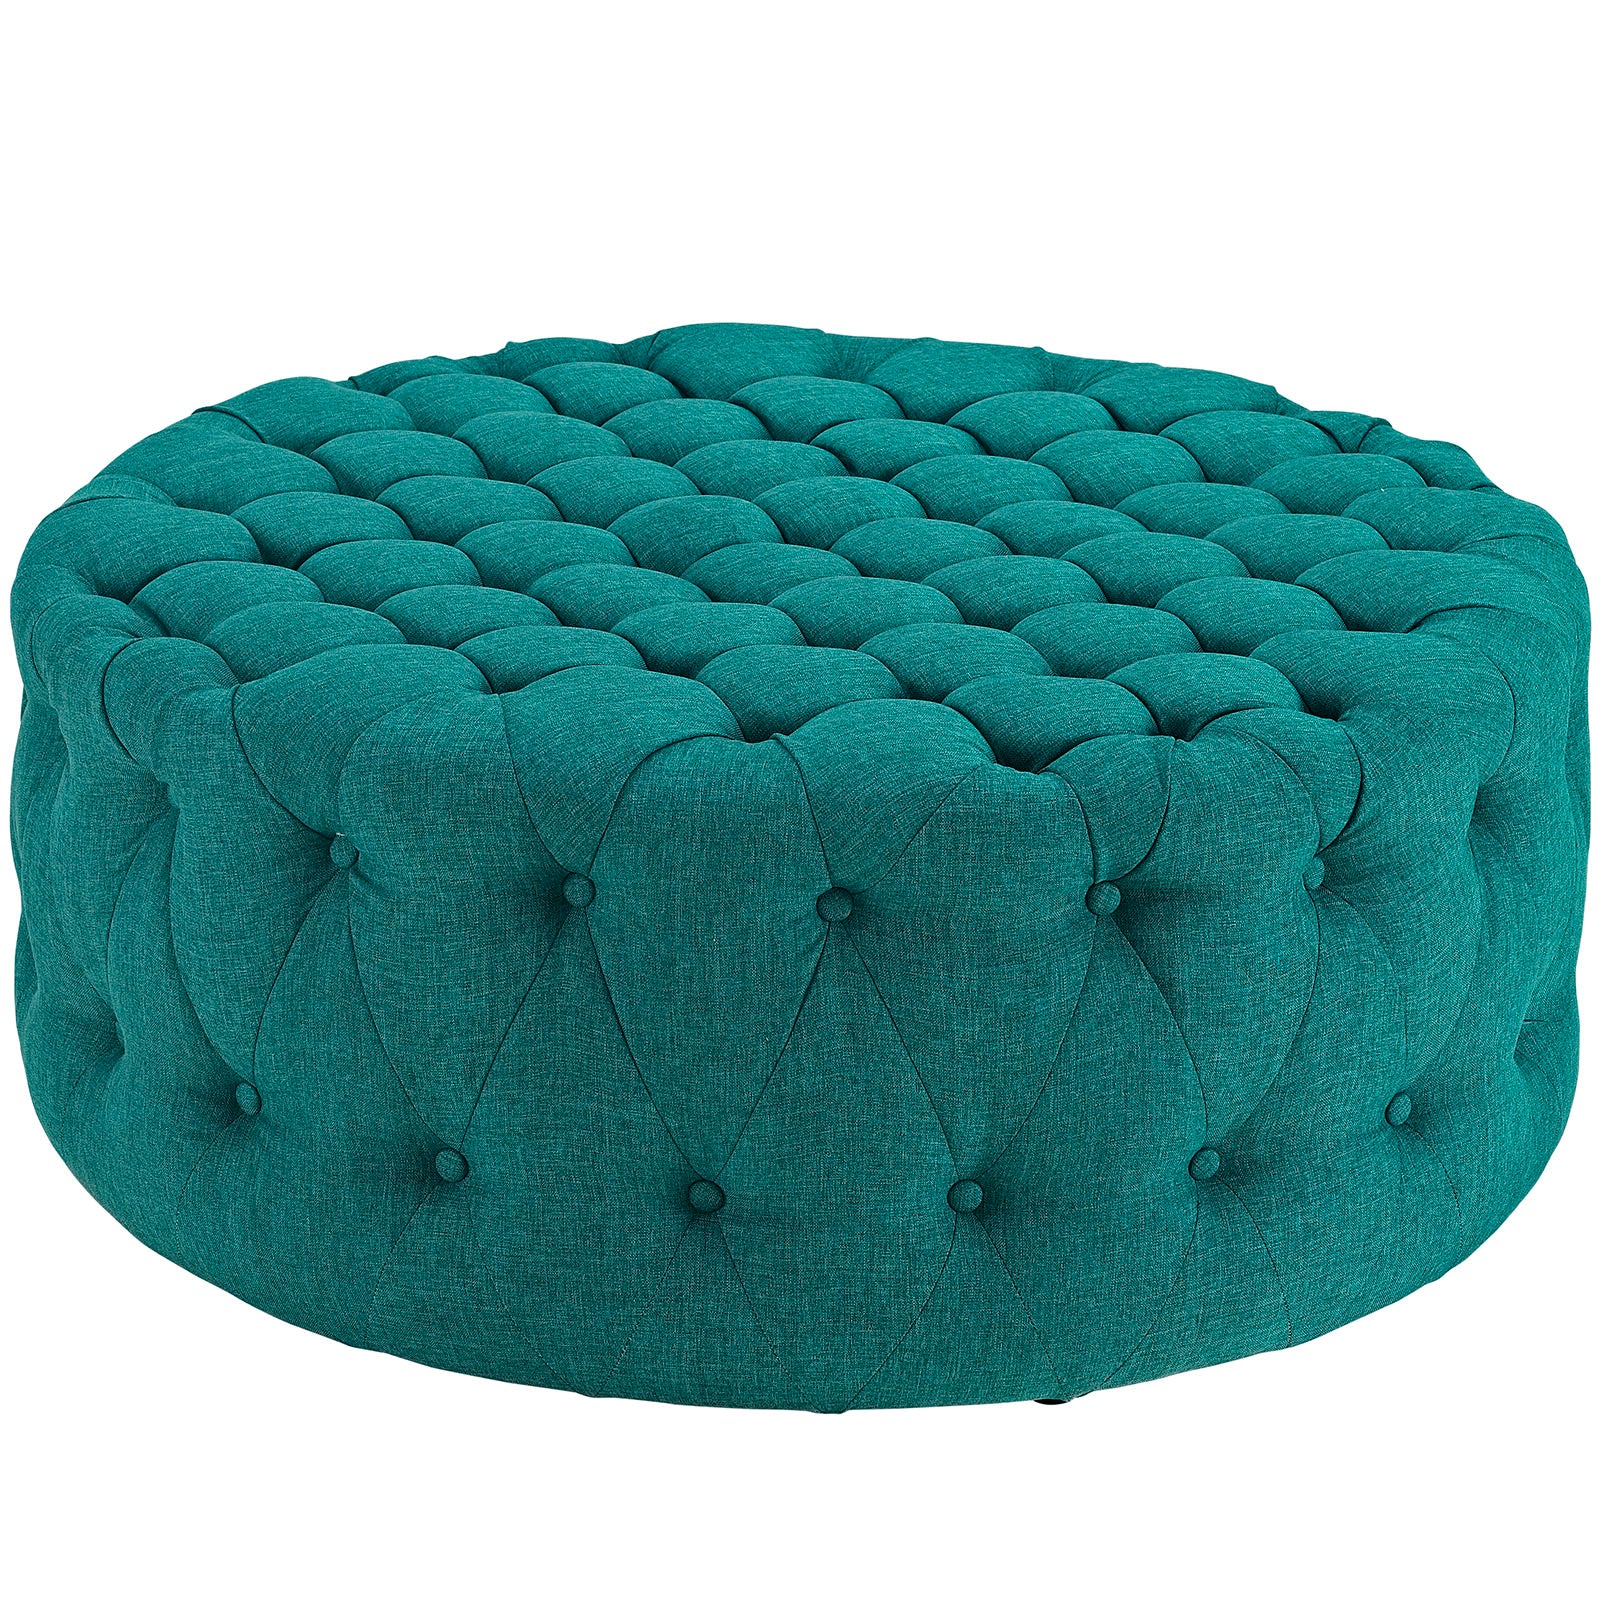 Modway Ottomans & Stools - Amour Upholstered Fabric Ottoman Teal